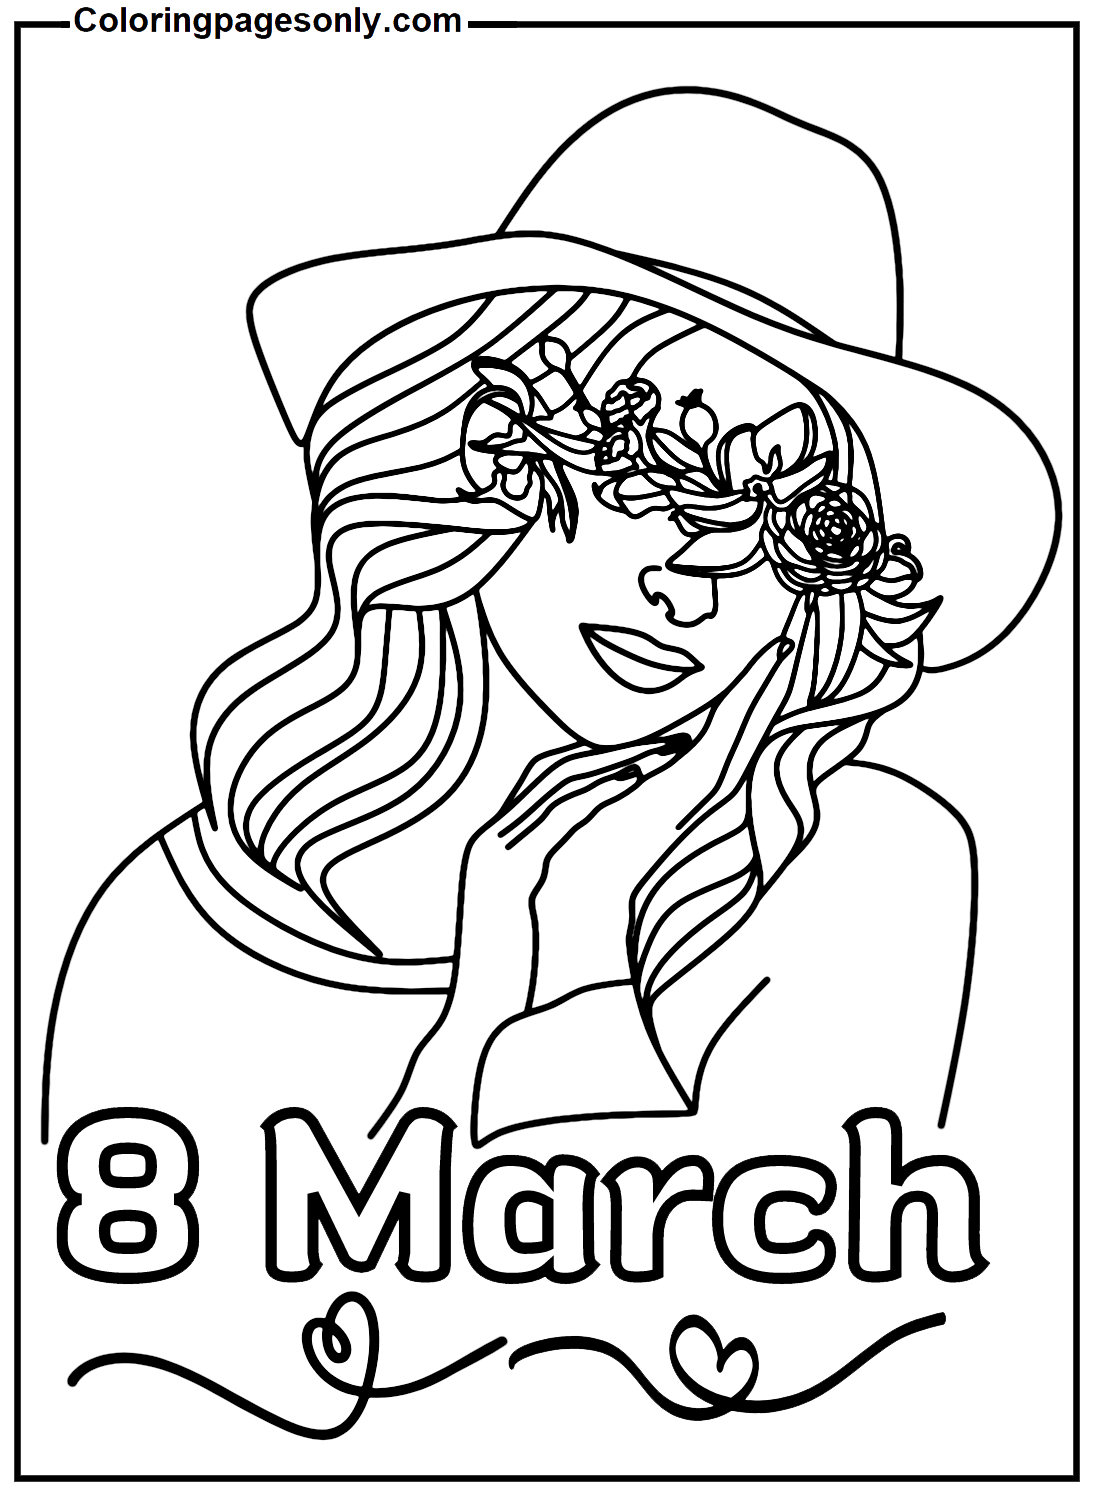 Beautiful Women In 8 March Coloring Pages